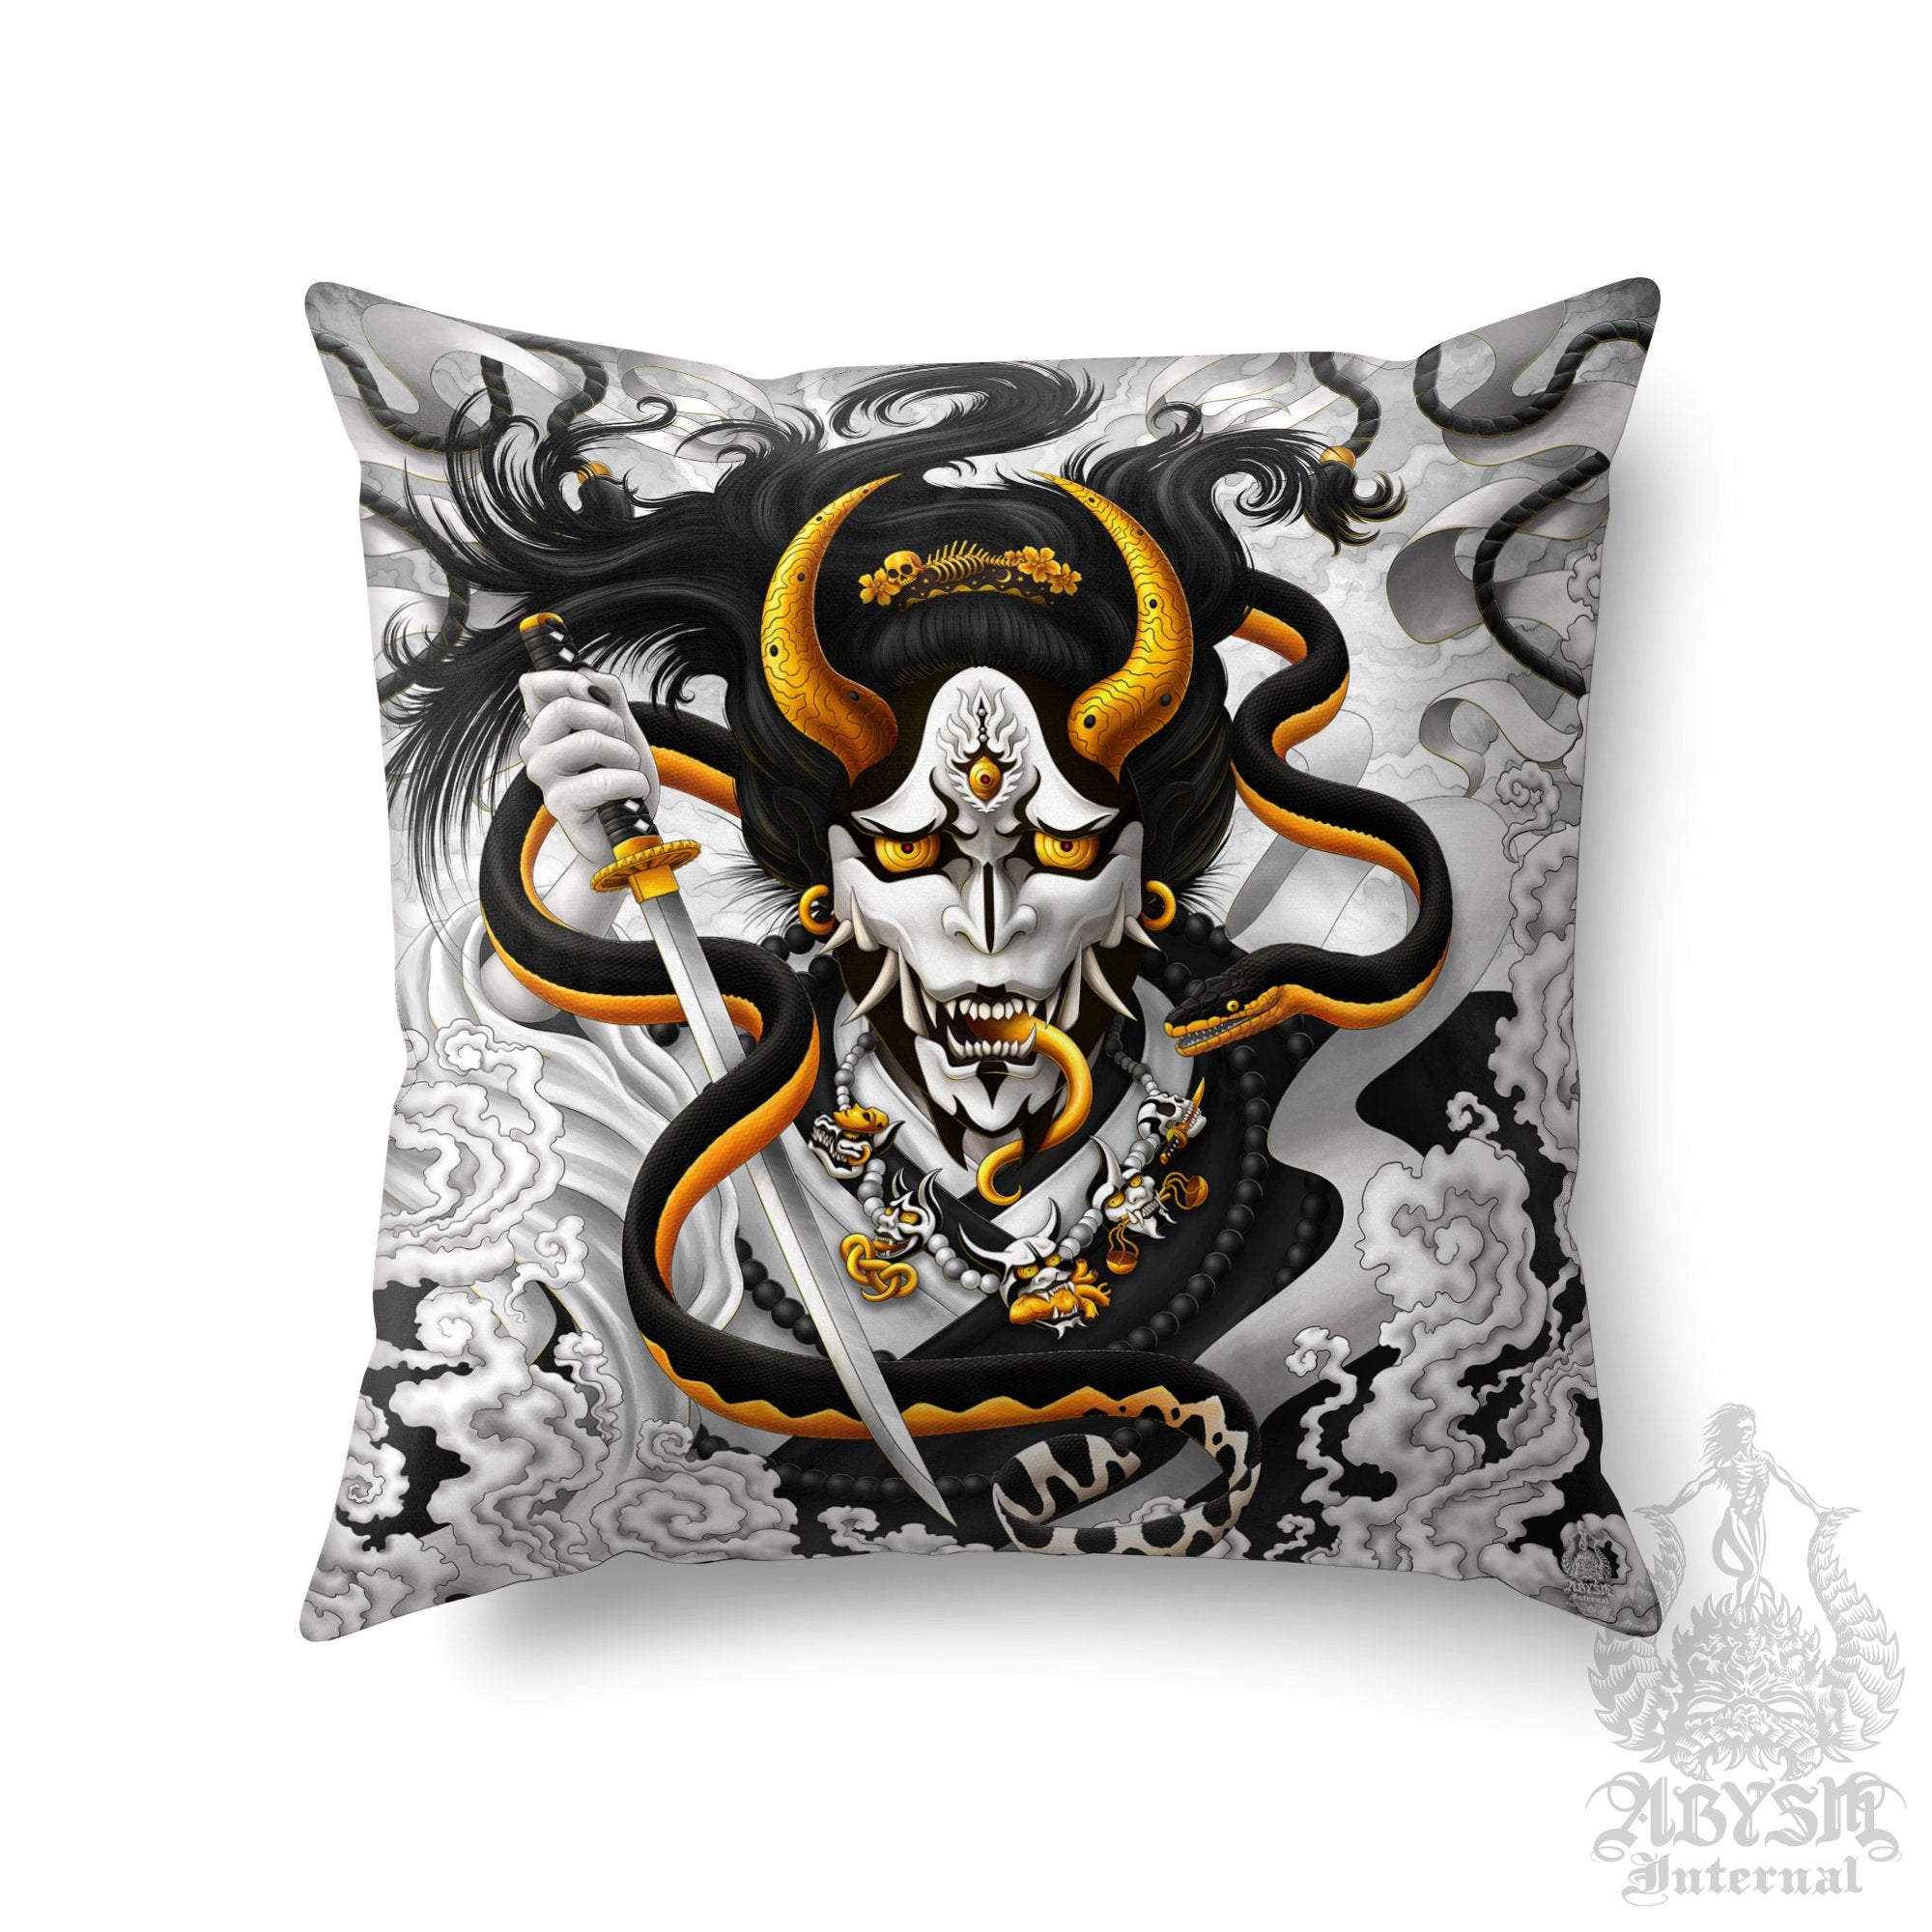 White and Black Hannya Throw Pillow, Decorative Accent Pillow, Square Cushion Cover, Japanese Demon & Snake, Anime Room Decor - Abysm Internal